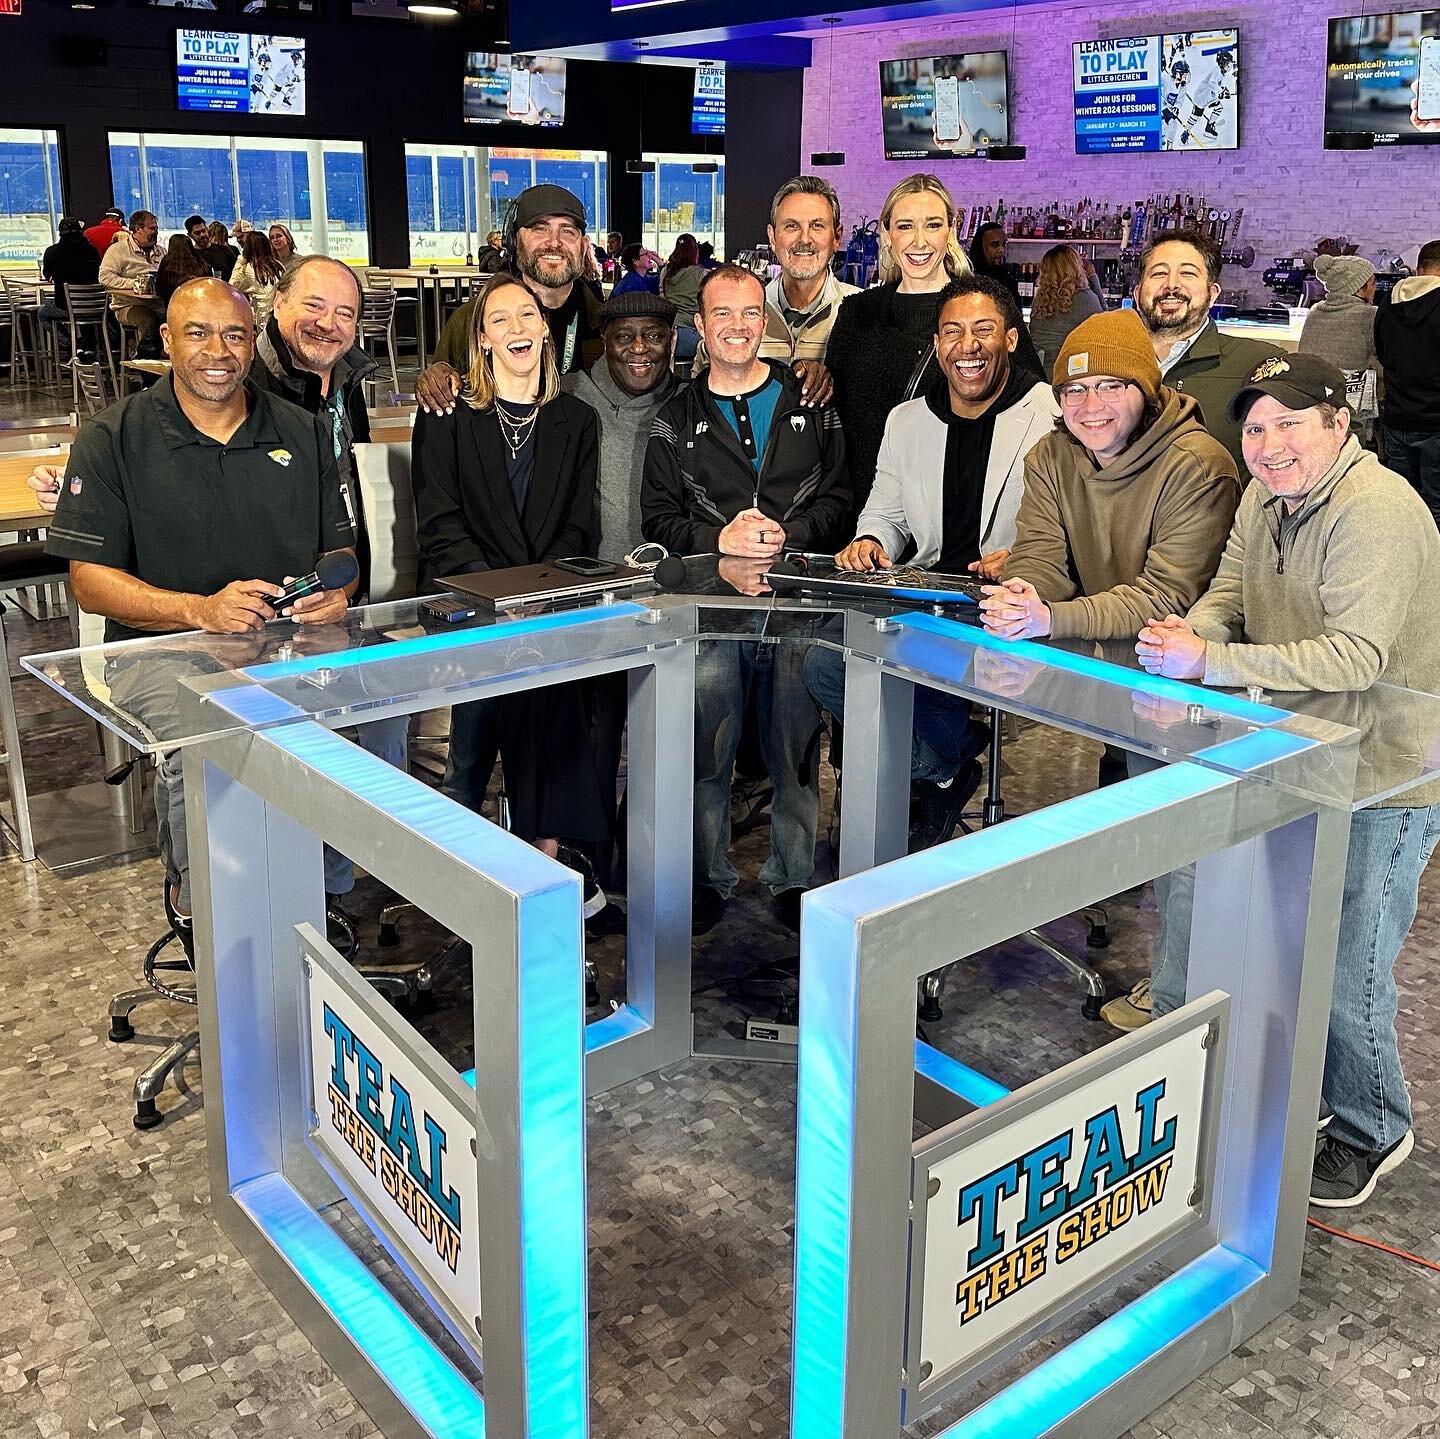 That&rsquo;s a wrap for our Teal The Show squad! Thank you to @commfirstigloo for hosting us each week and our @jaguars for fighting through this season- we&rsquo;ll come back stronger together! More coverage + more wins = more DUUUVALLLLLL 🏈🤍🎬